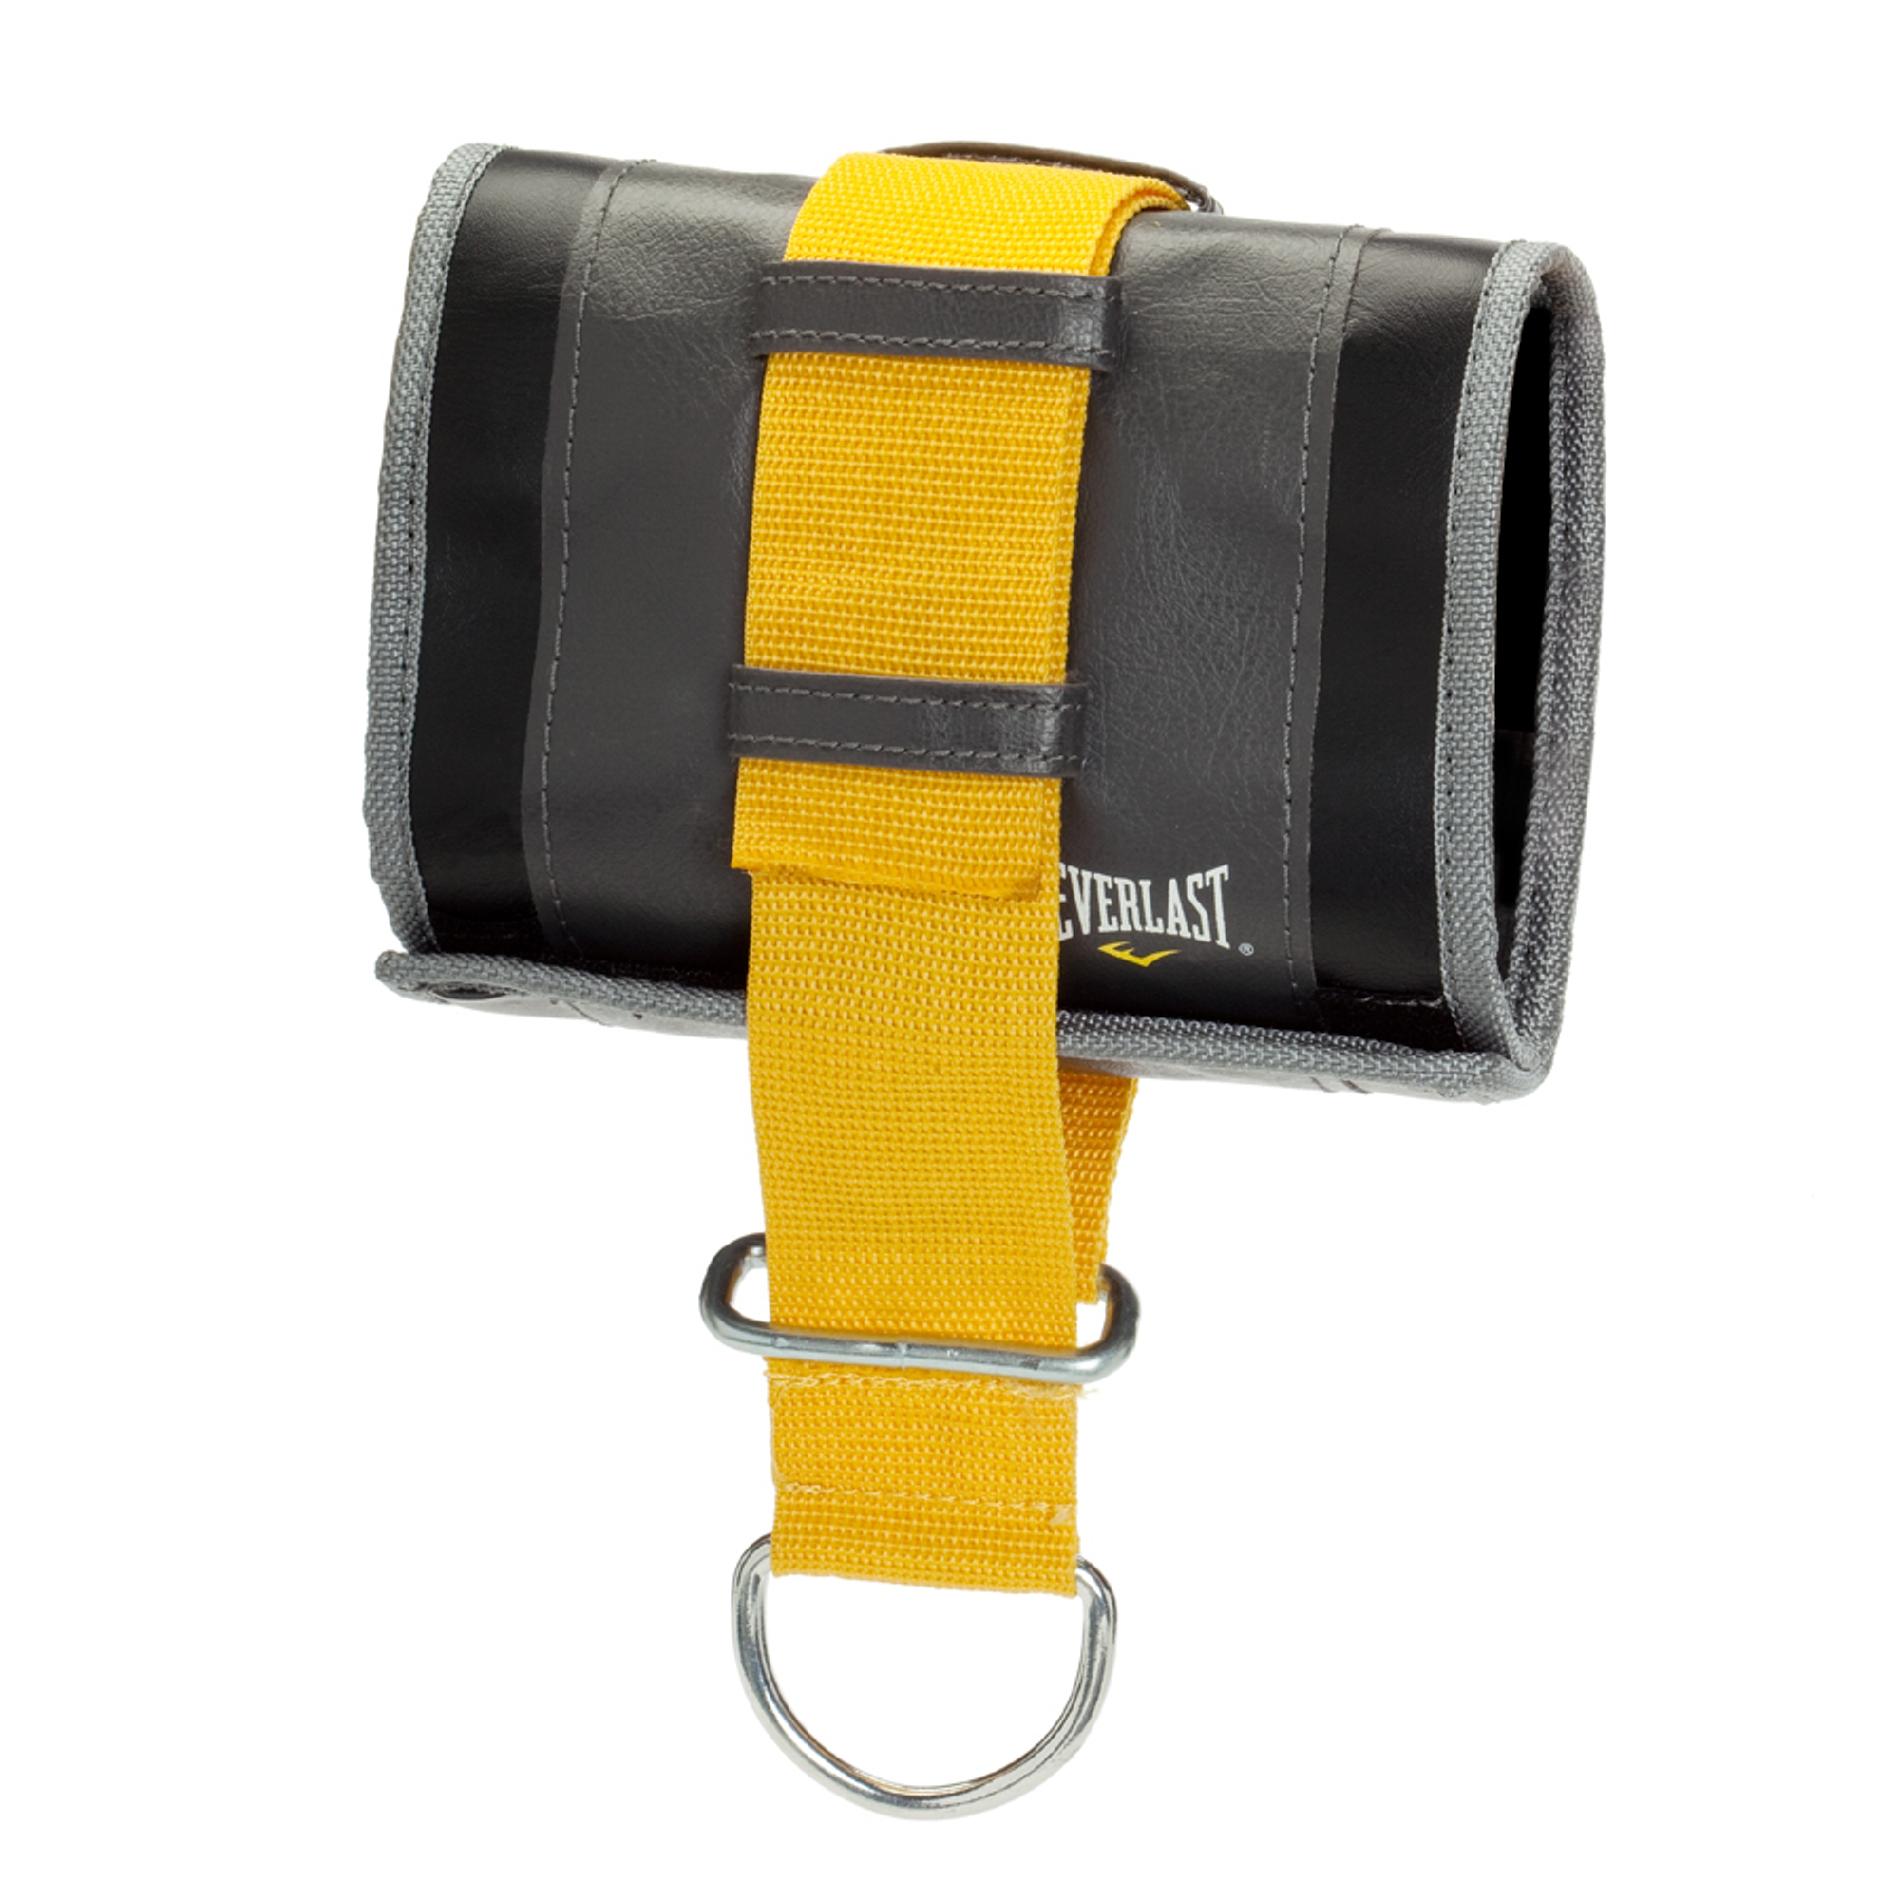 Everlast® Universal Heavy Bag Hanger - Fitness & Sports - Extreme Sports - Boxing & Mixed ...